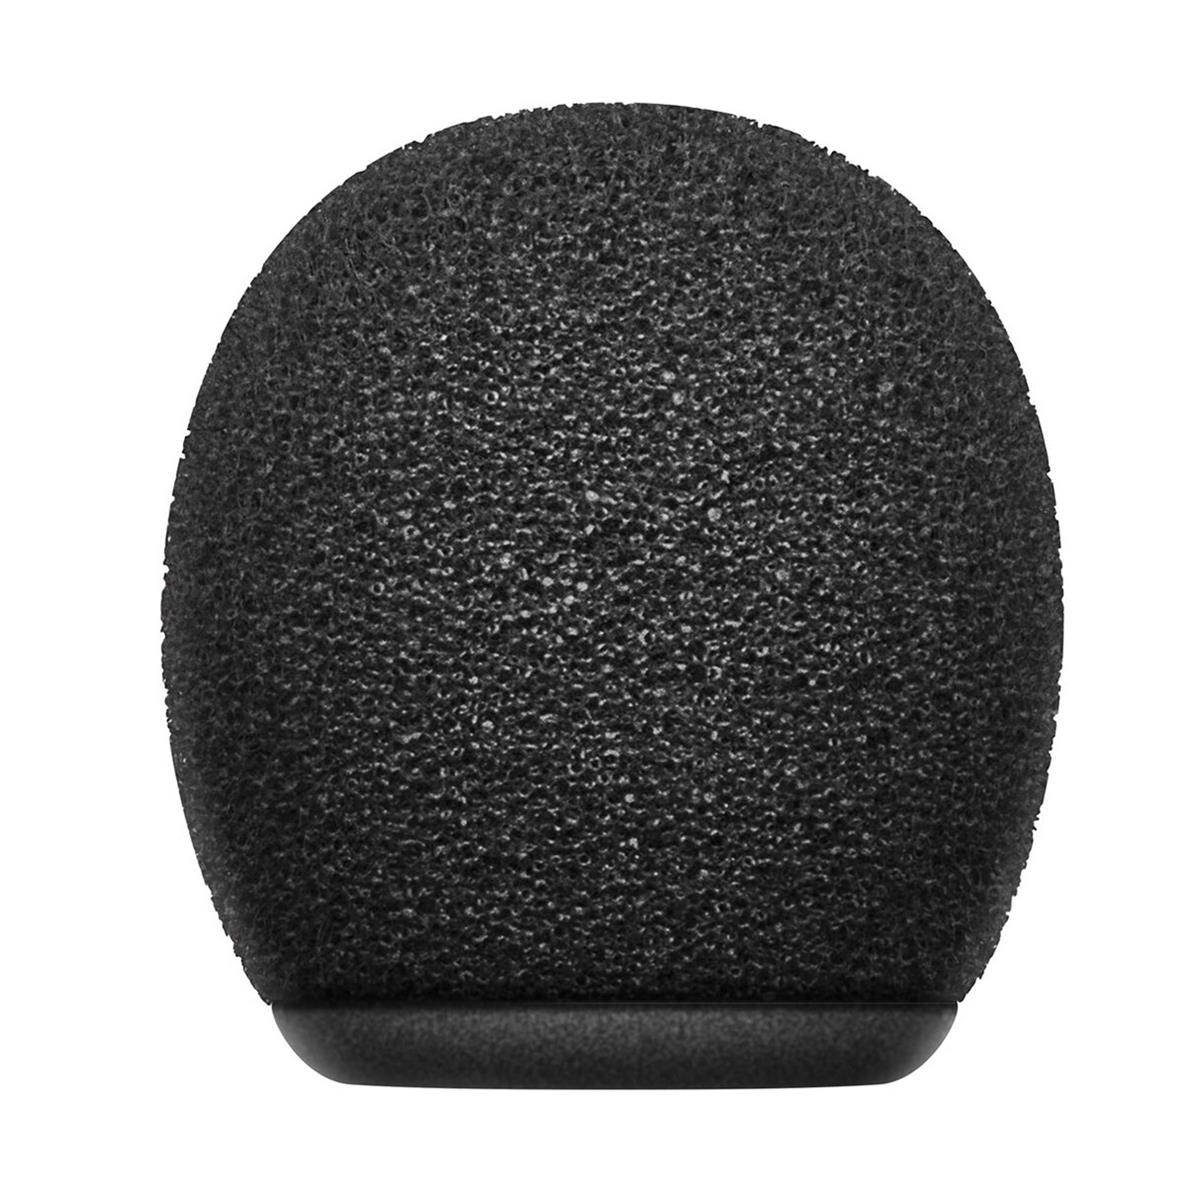 Image of Sennheiser Foam Windshield for XS Lav USB-C and XS Lav Mobile Microphone